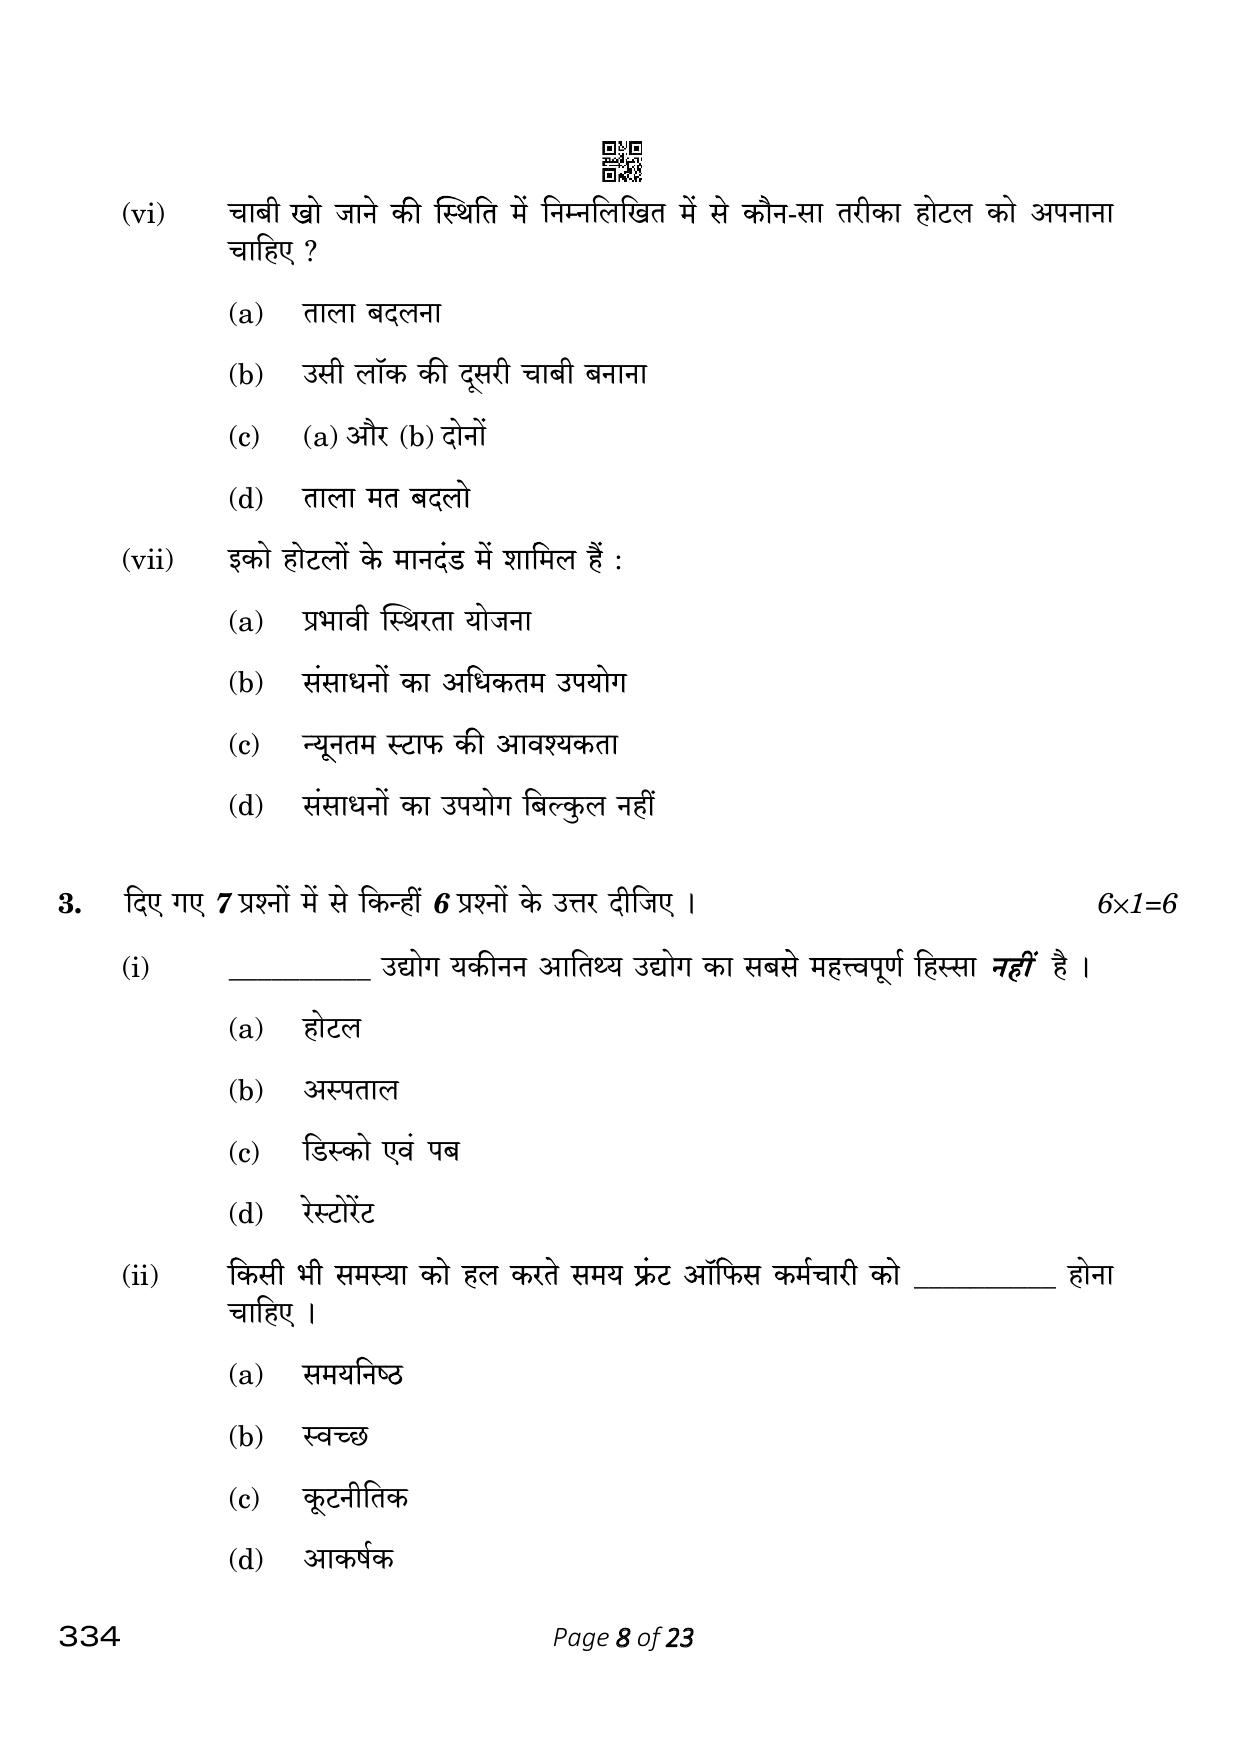 CBSE Class 12 334_Front Office Operations 2023 Question Paper - Page 8